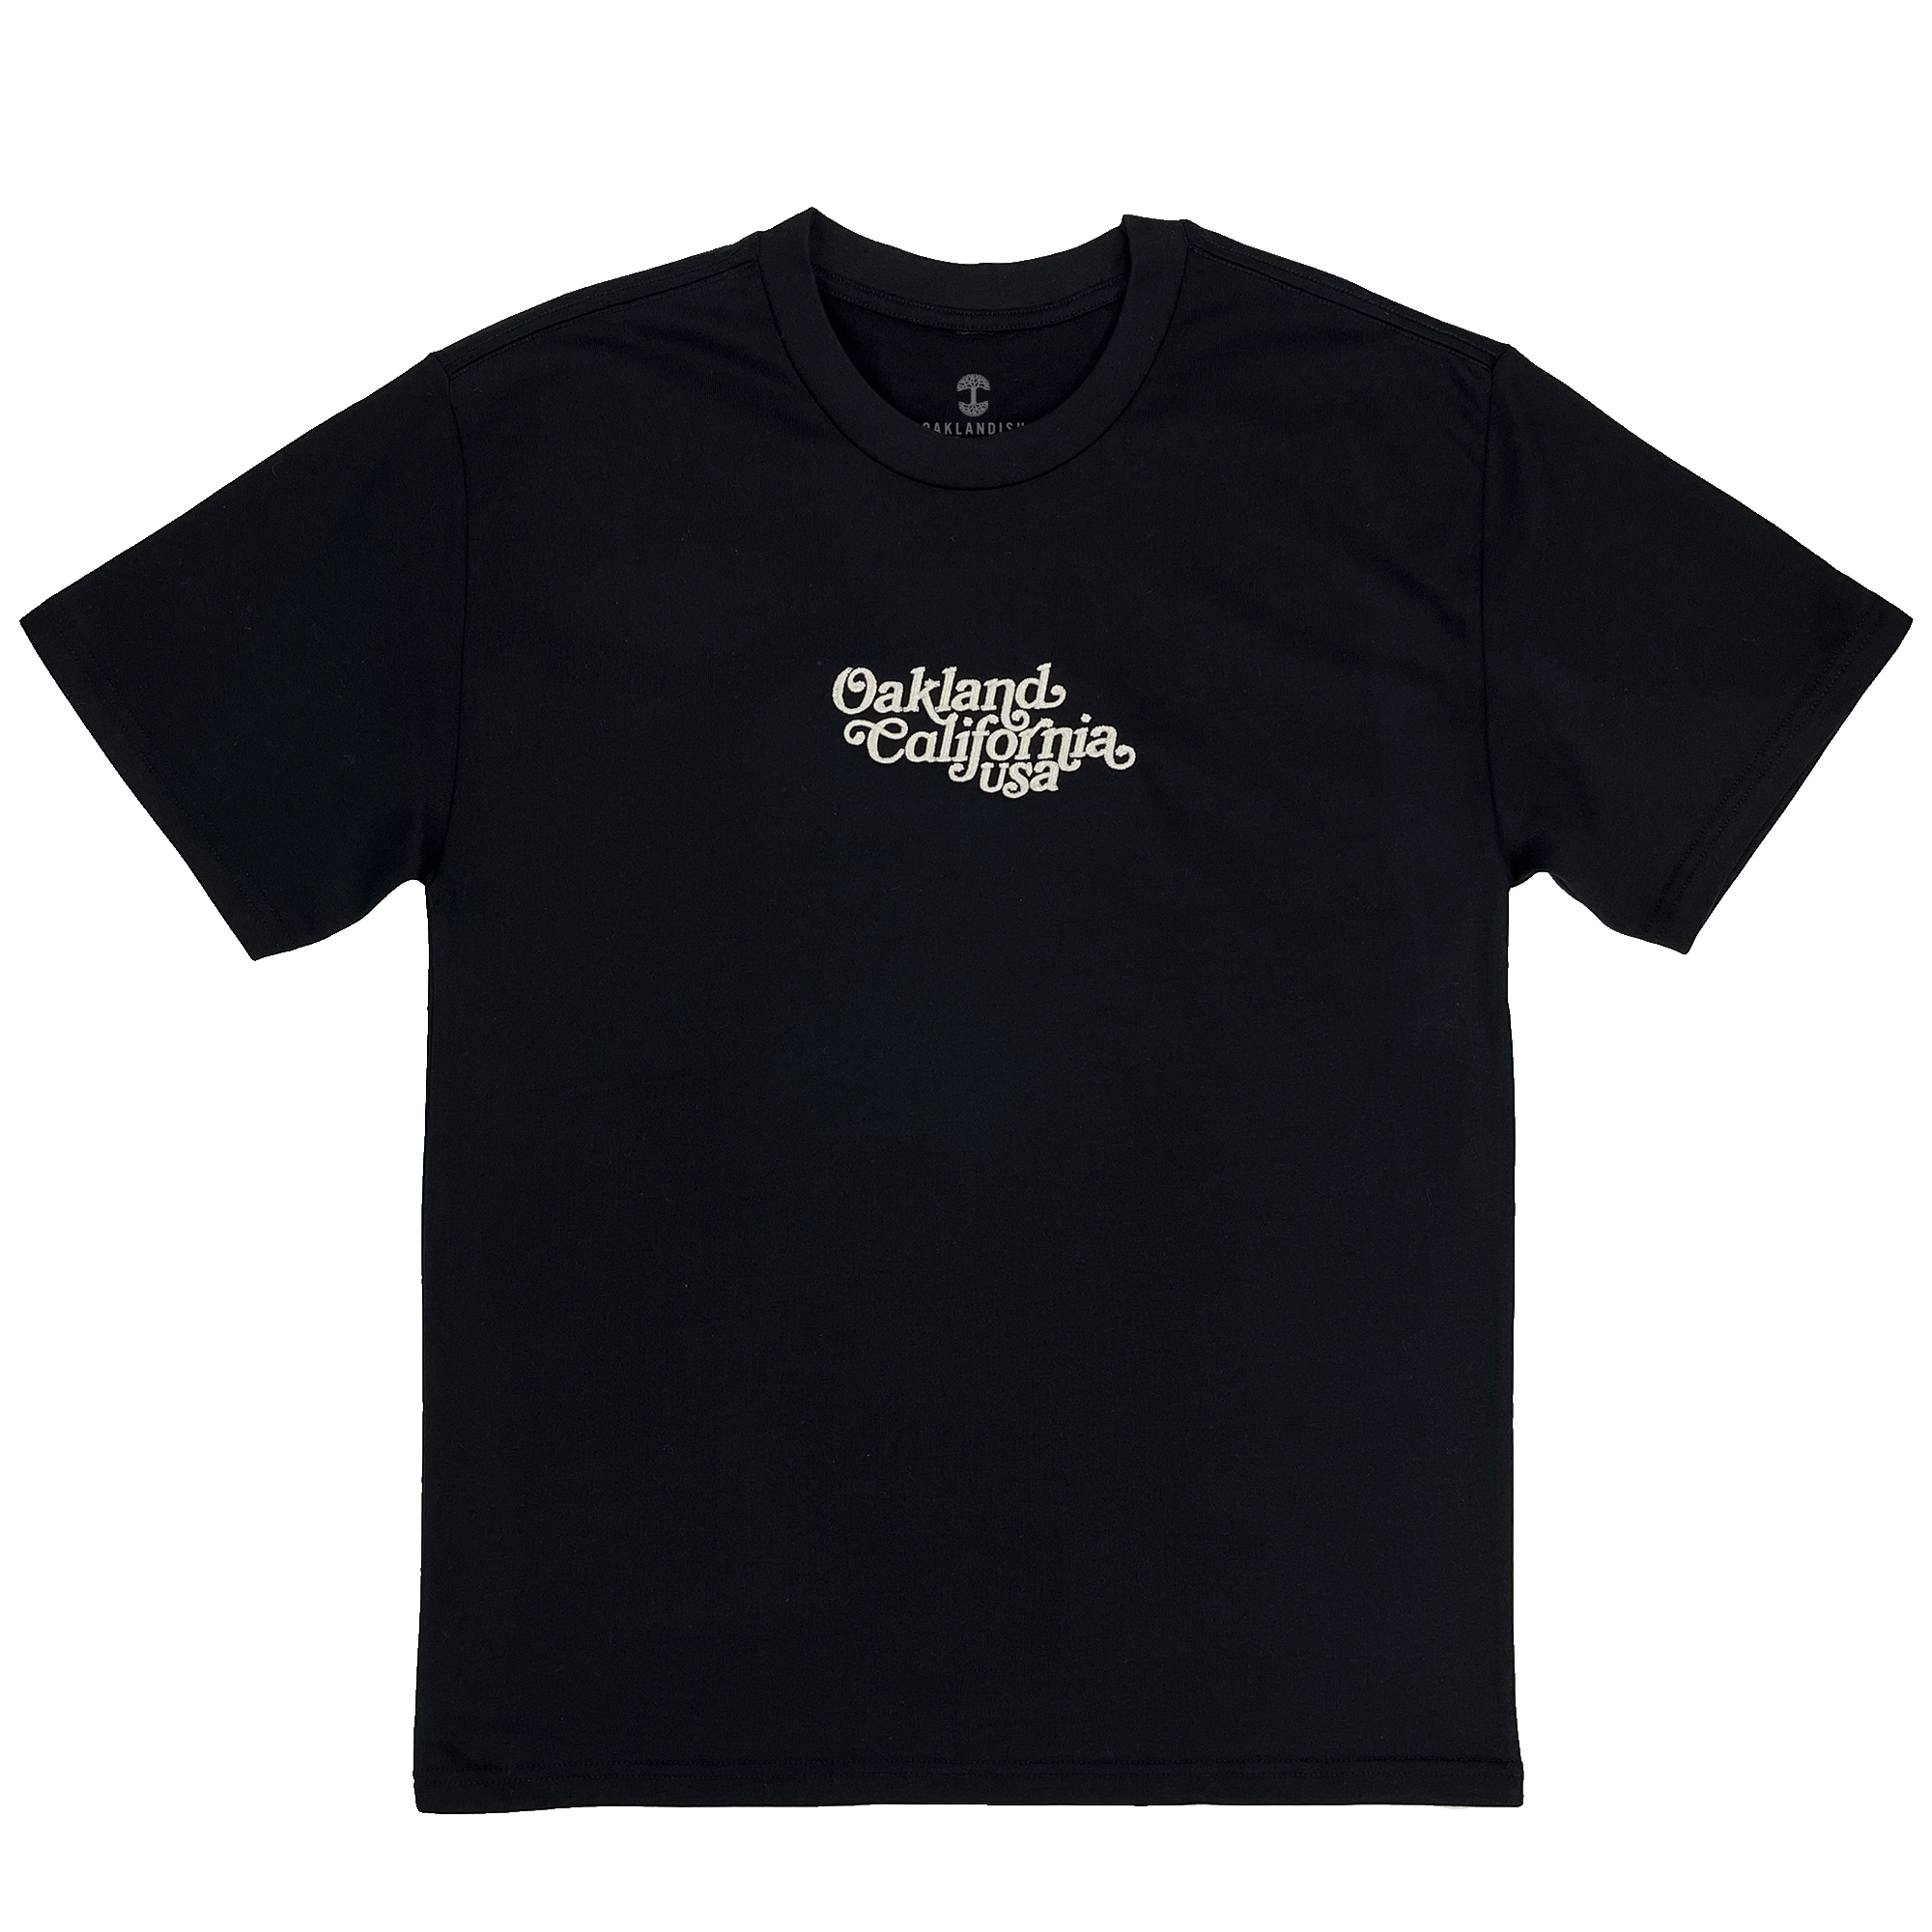 Front view of black t-shirt with white Oakland California USA script embroidered on chest.